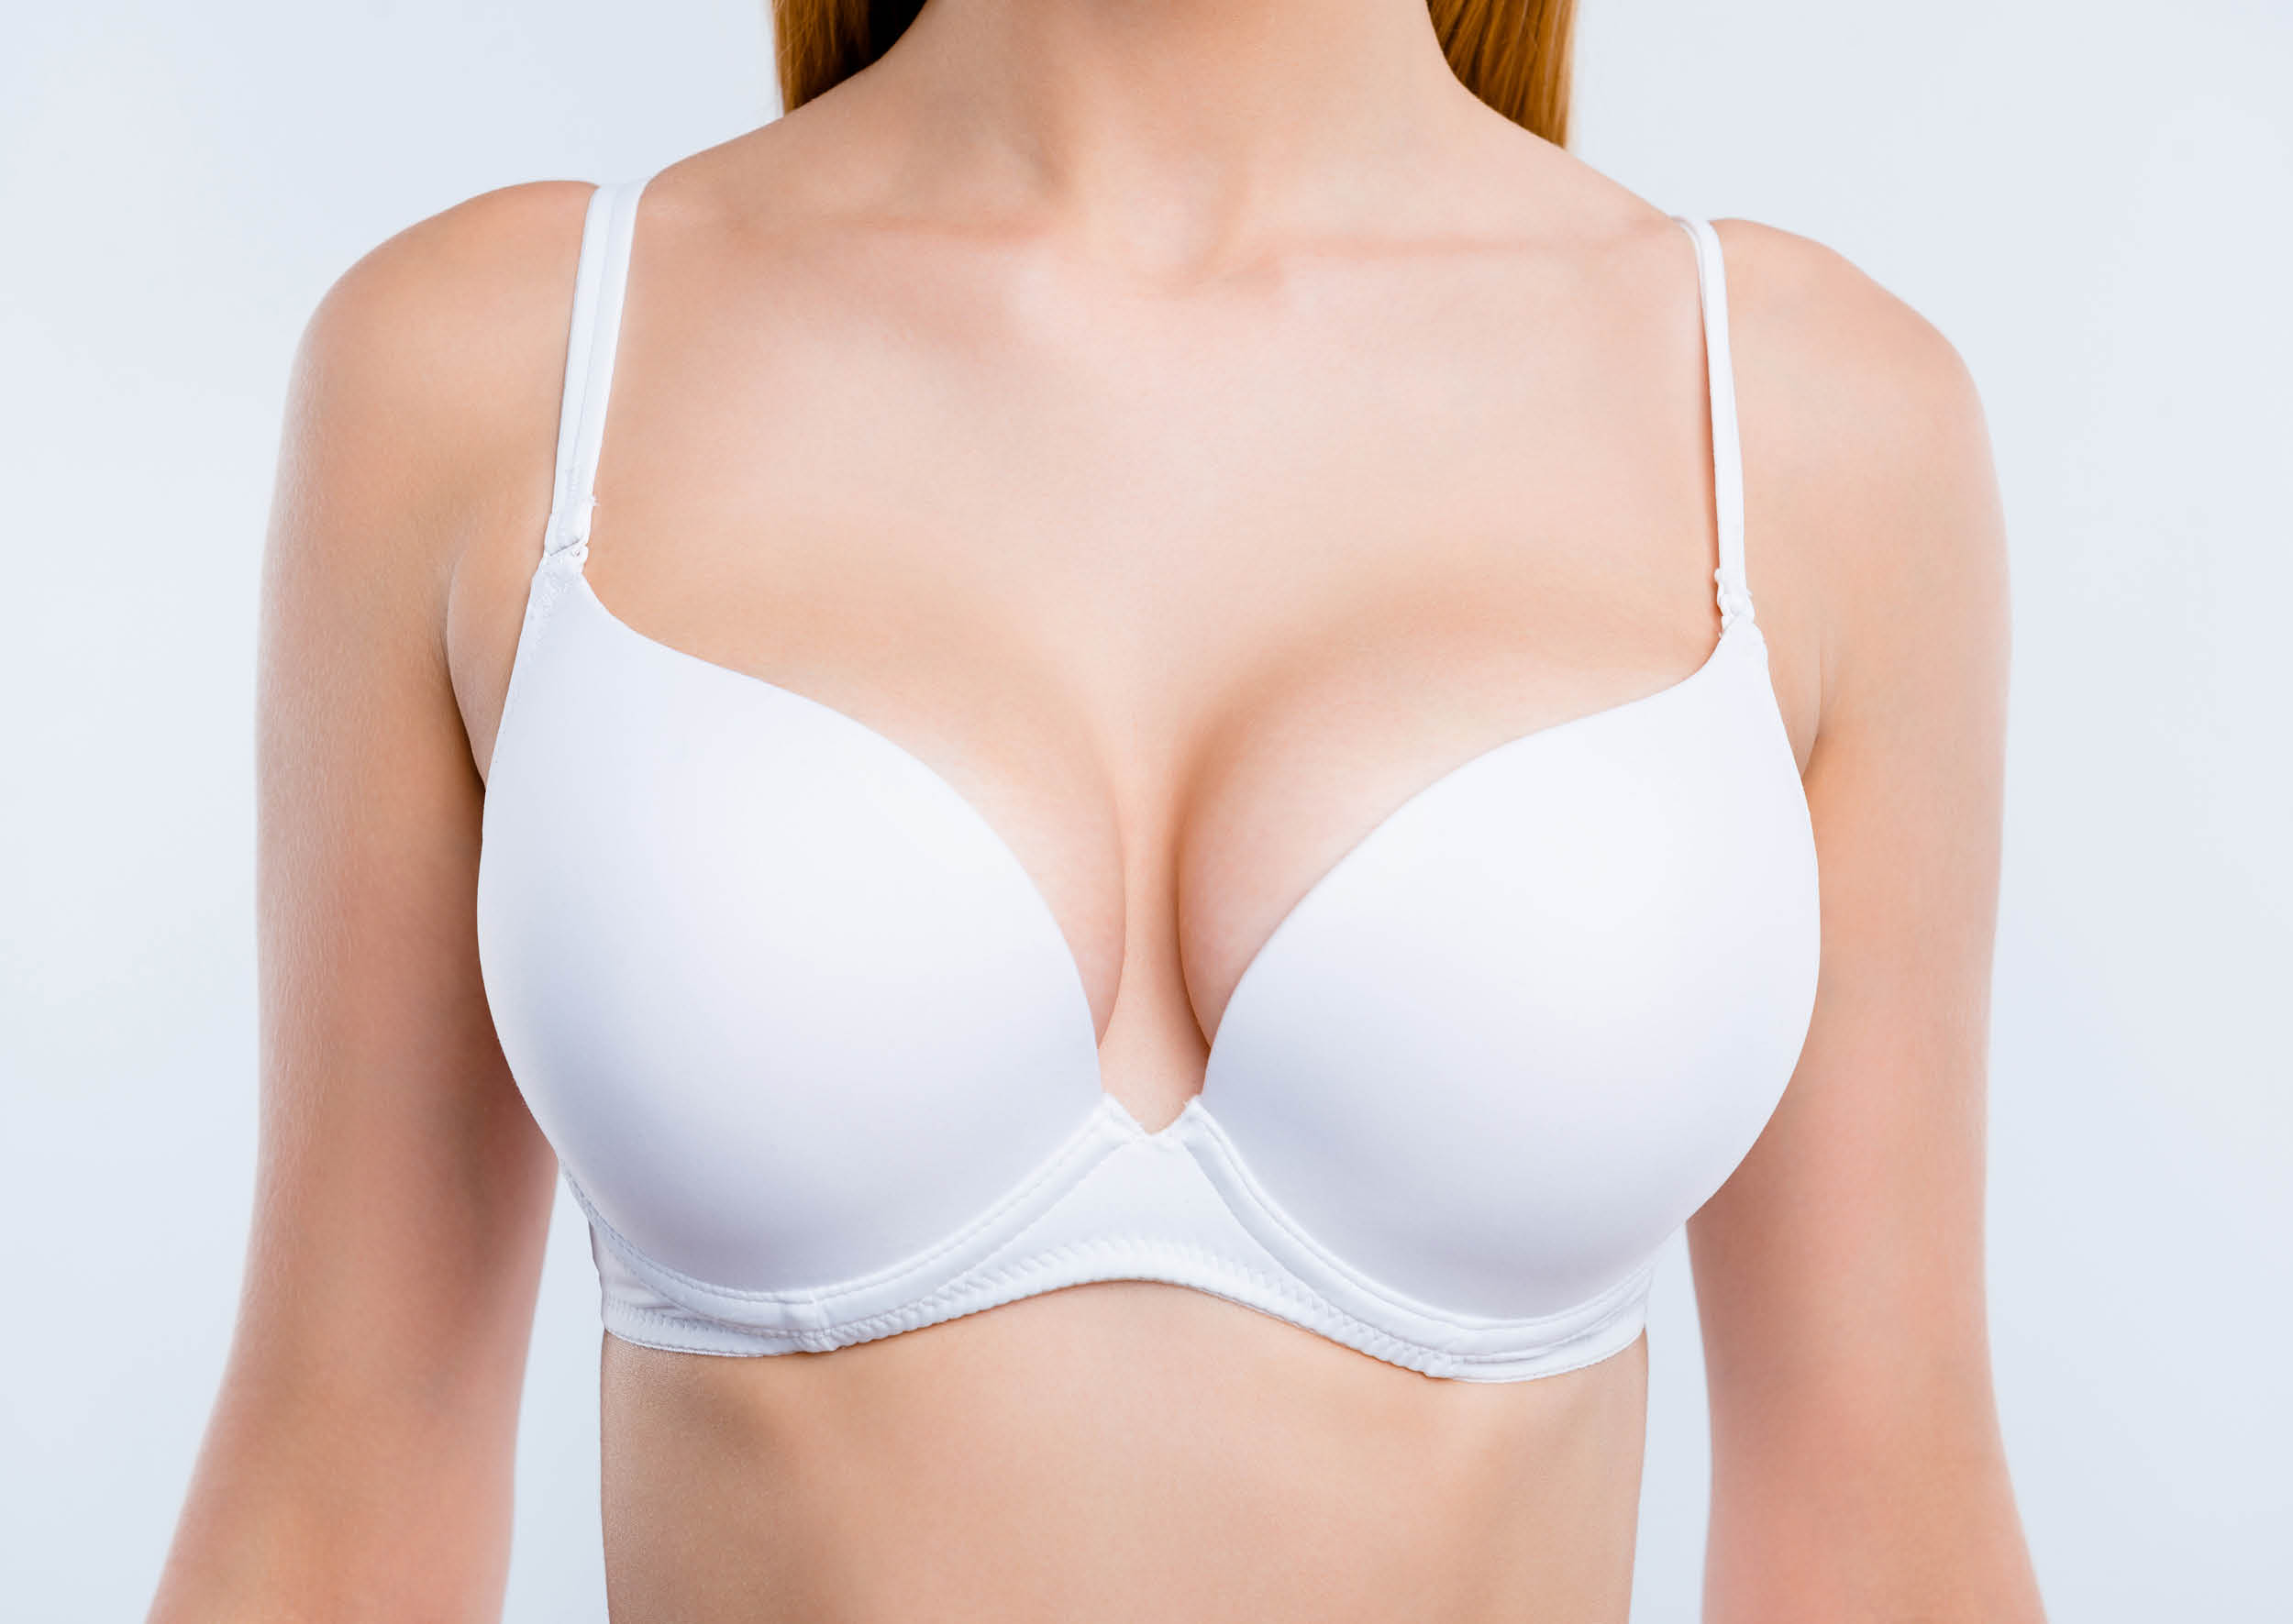 Breast augmentation is a surgical procedure to increase the size and enhance the shape of a person's breasts using implants or fat transfer.